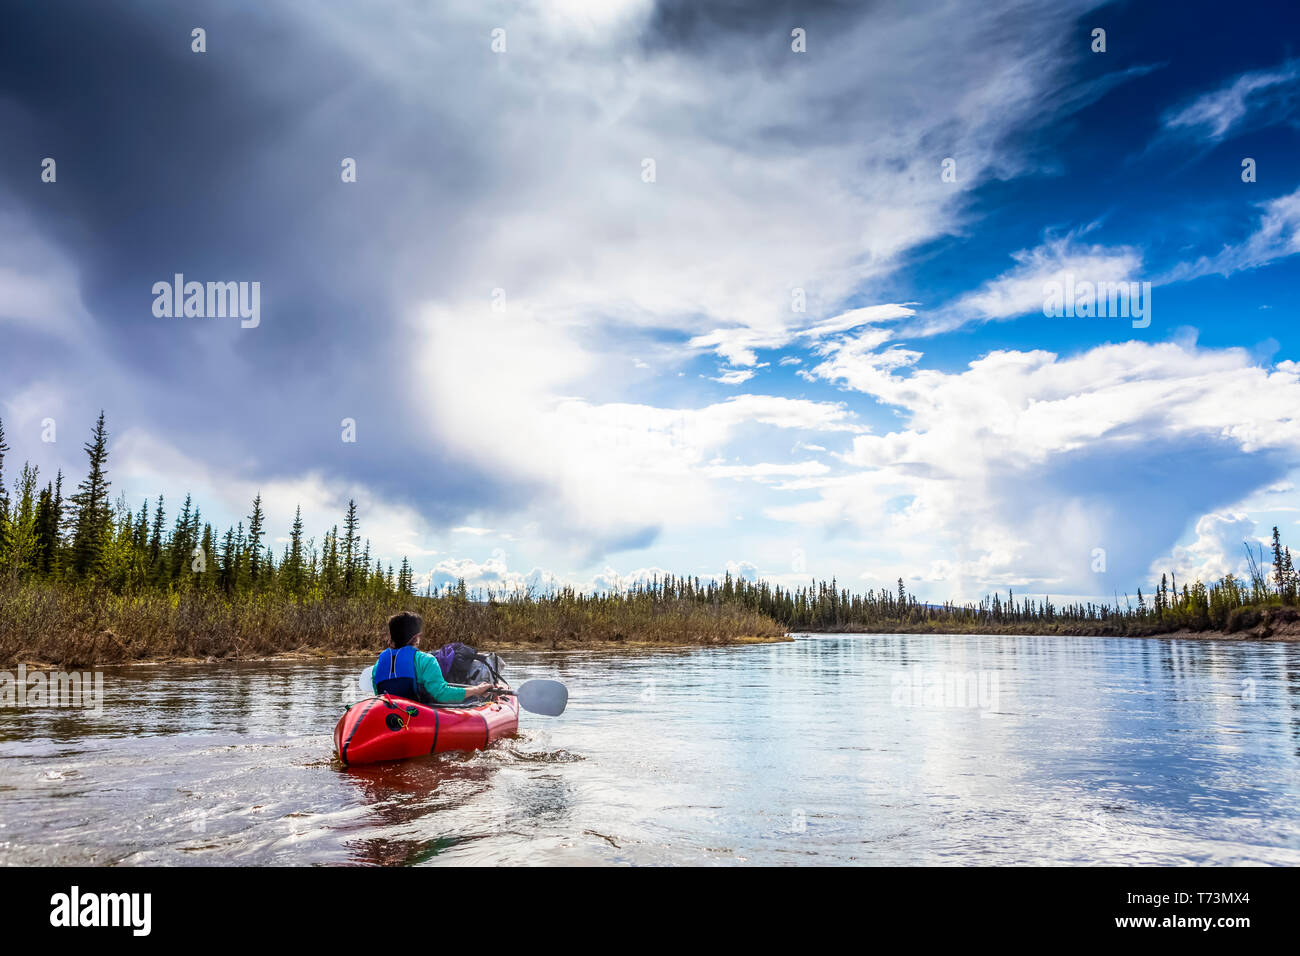 Woman packrafting down Beaver Creek, National Wild and Scenic Rivers System, White Mountains National Recreation Area, Interior Alaska Stock Photo